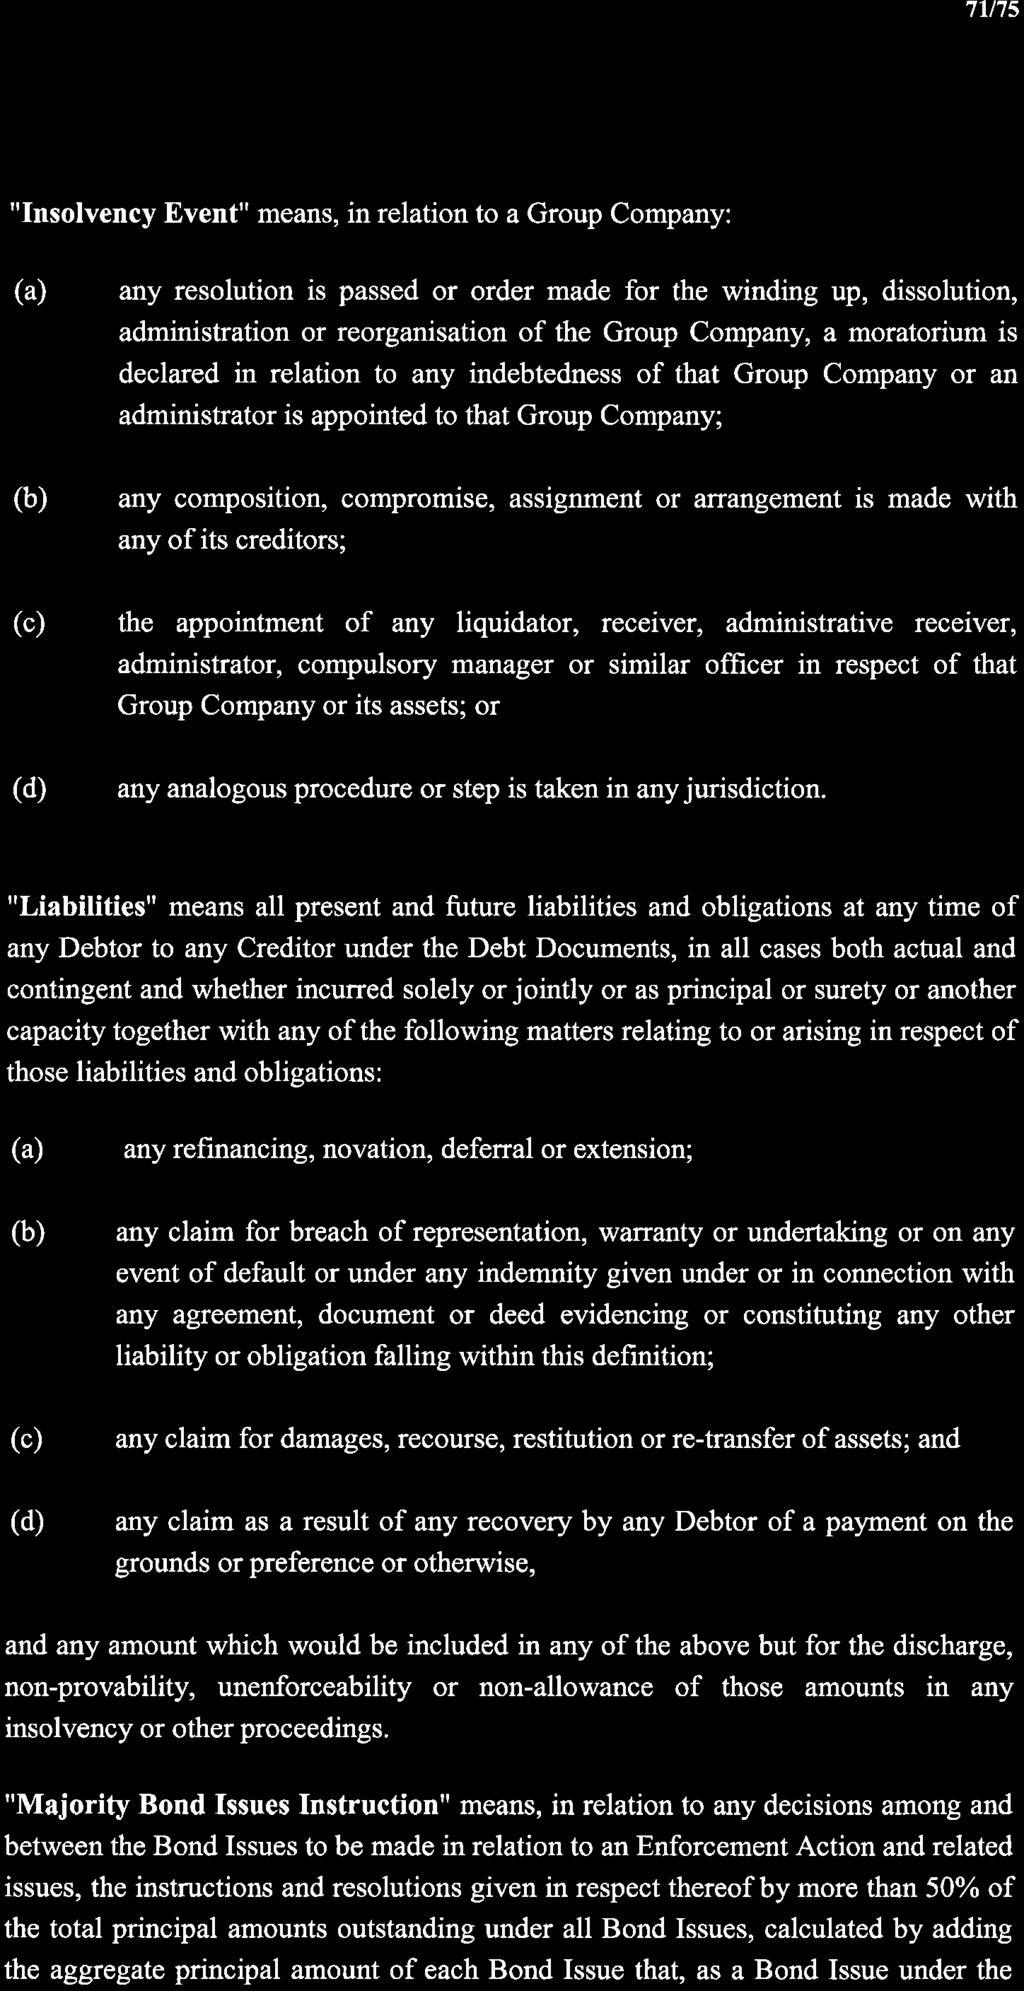 7lt7s "Insolvency Event" means, in relation to a Group Company: (a) any resolution is passed or order made for the winding up, dissolution, administration or reorganisation of the Group Company, a